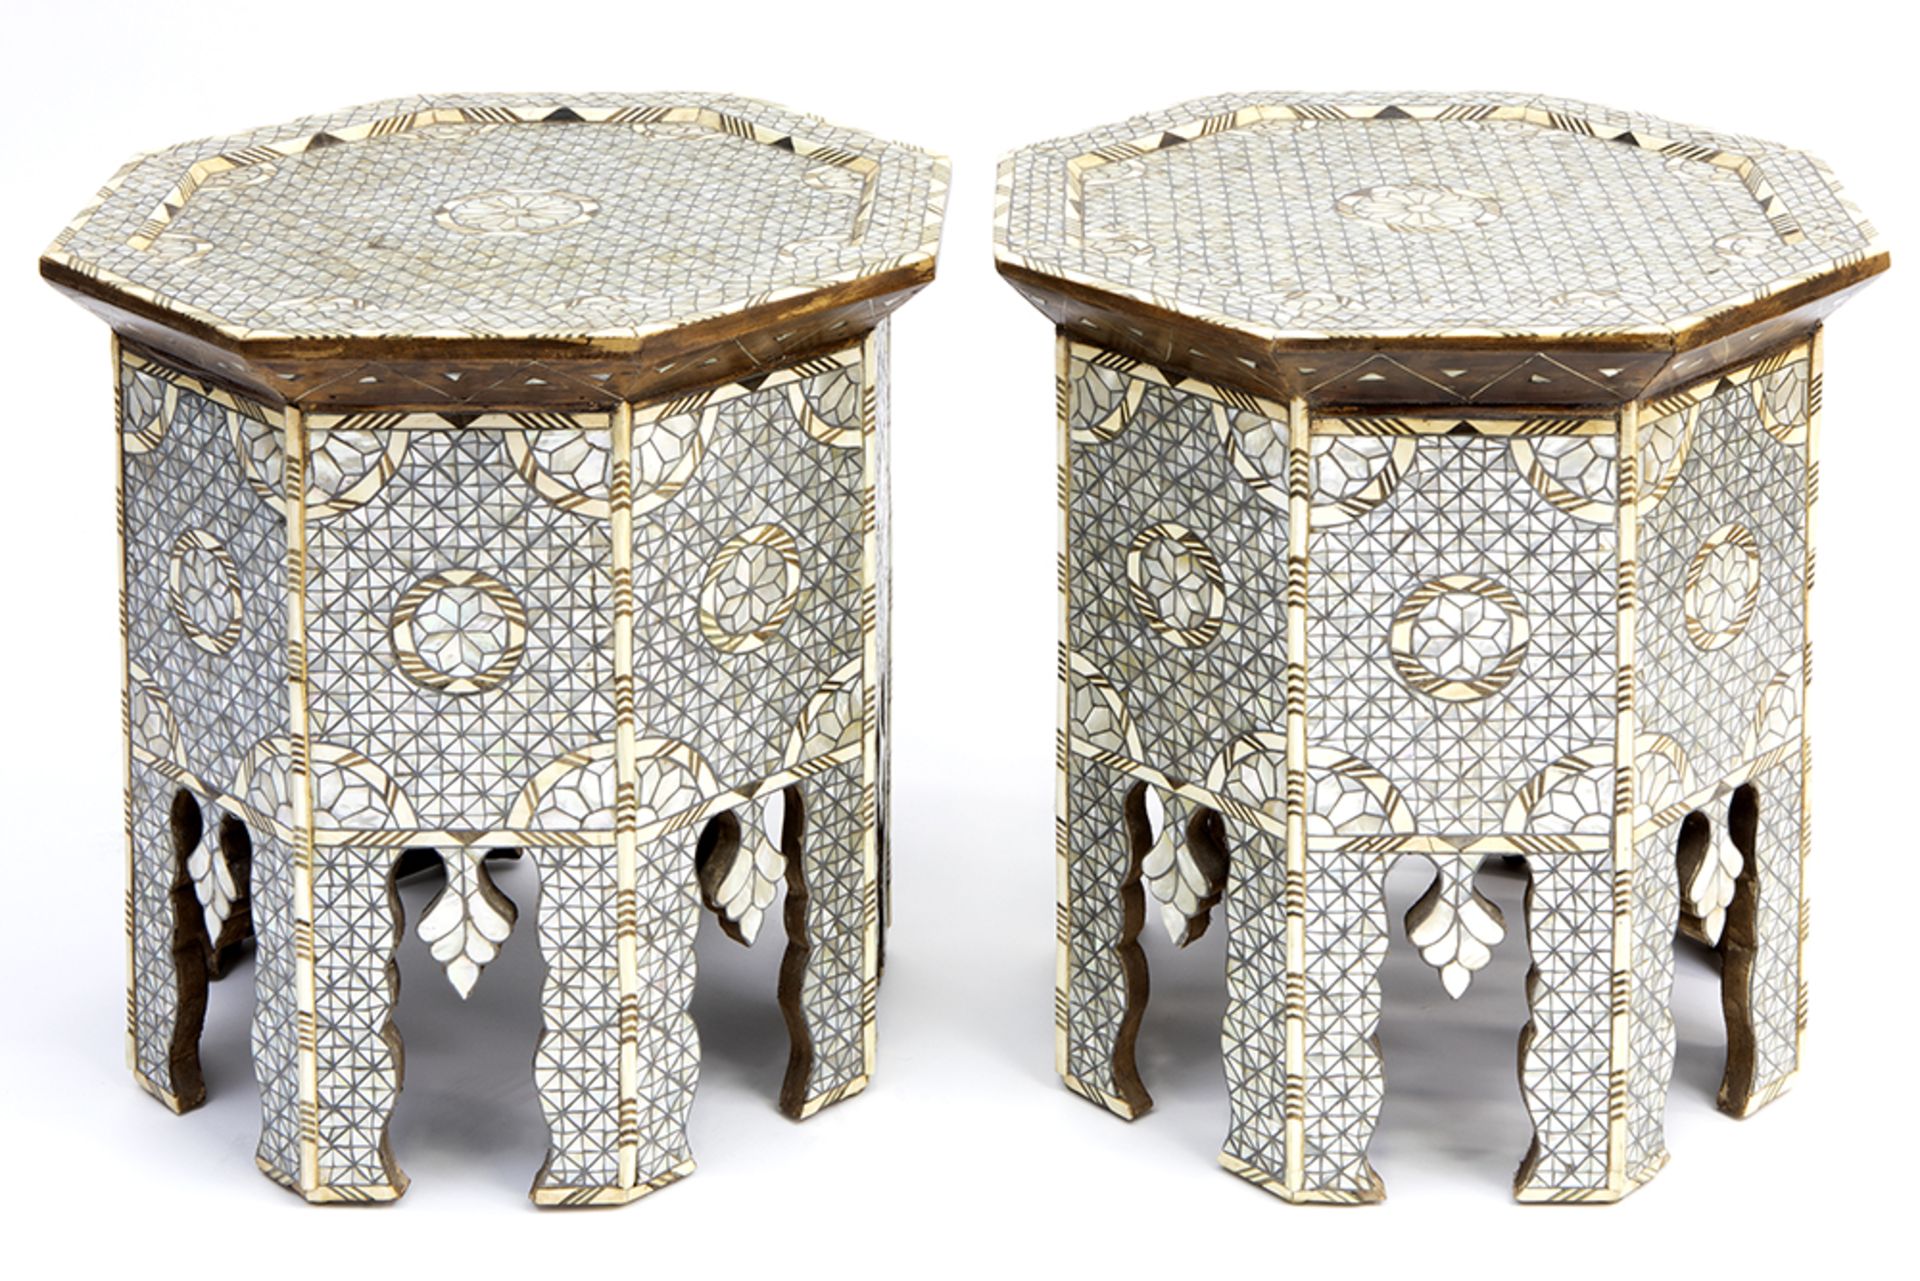 pair of 'antique' Ottoman occasional tables with octogonal shape, made in Turkey or Syria in ca